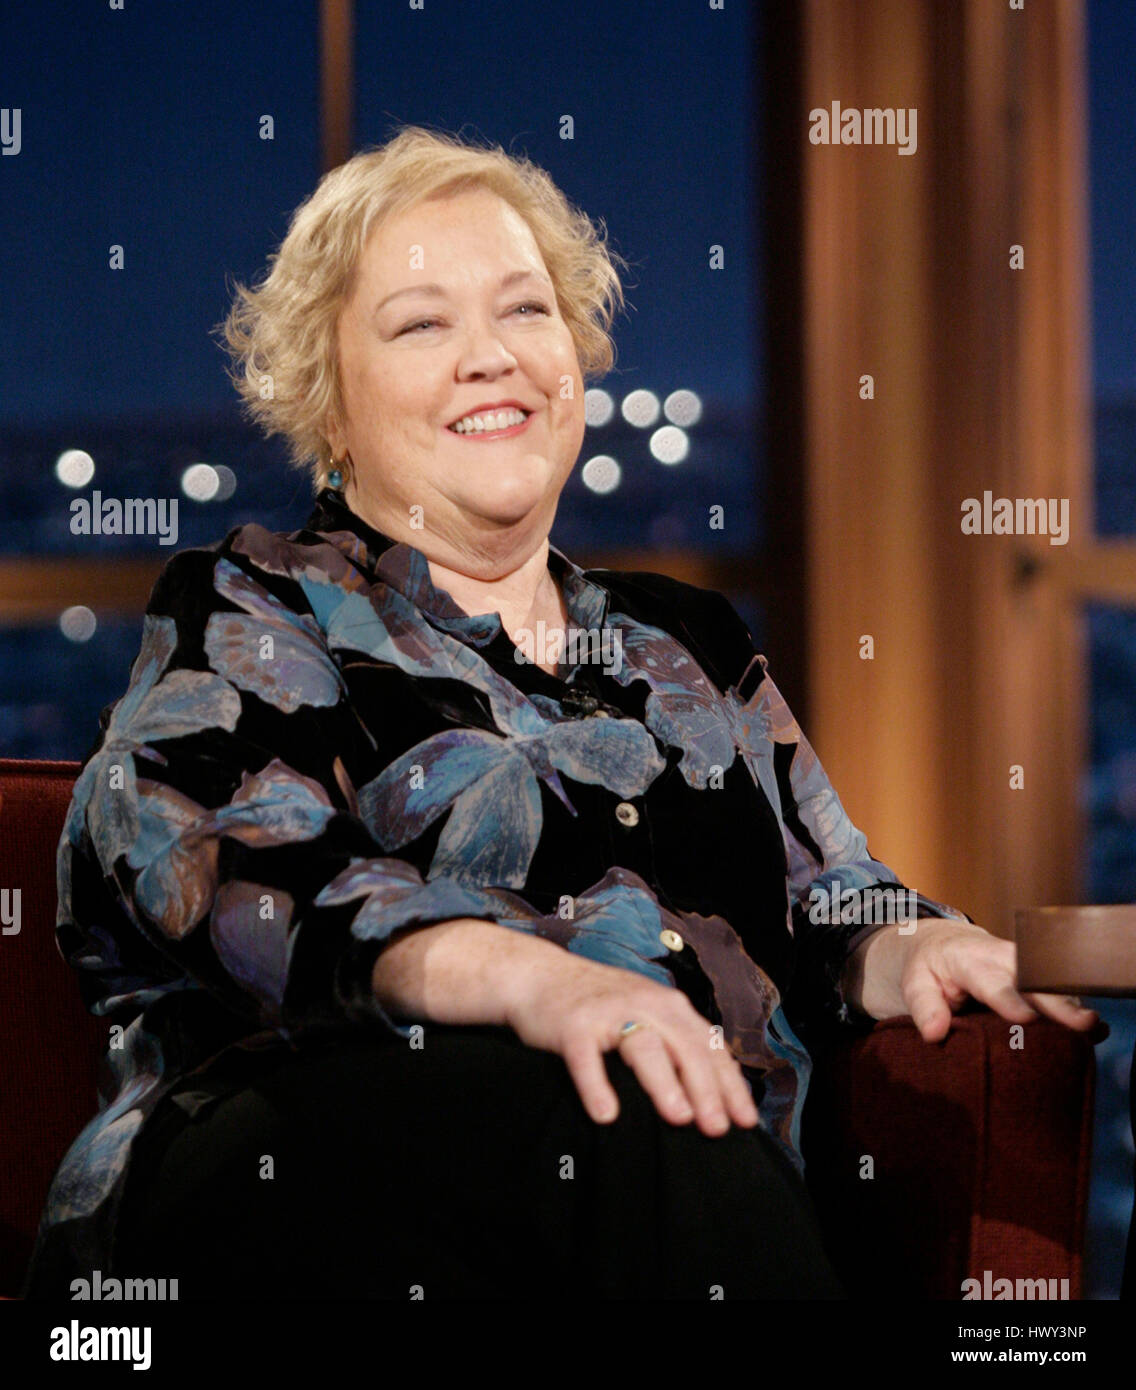 Actress Kathy Kinney during a segment of 'The Late Late Show with Craig Ferguson' at CBS Television City in Los Angeles on Wednesday, Nov. 12, 2008. Photo by Francis Specker Stock Photo